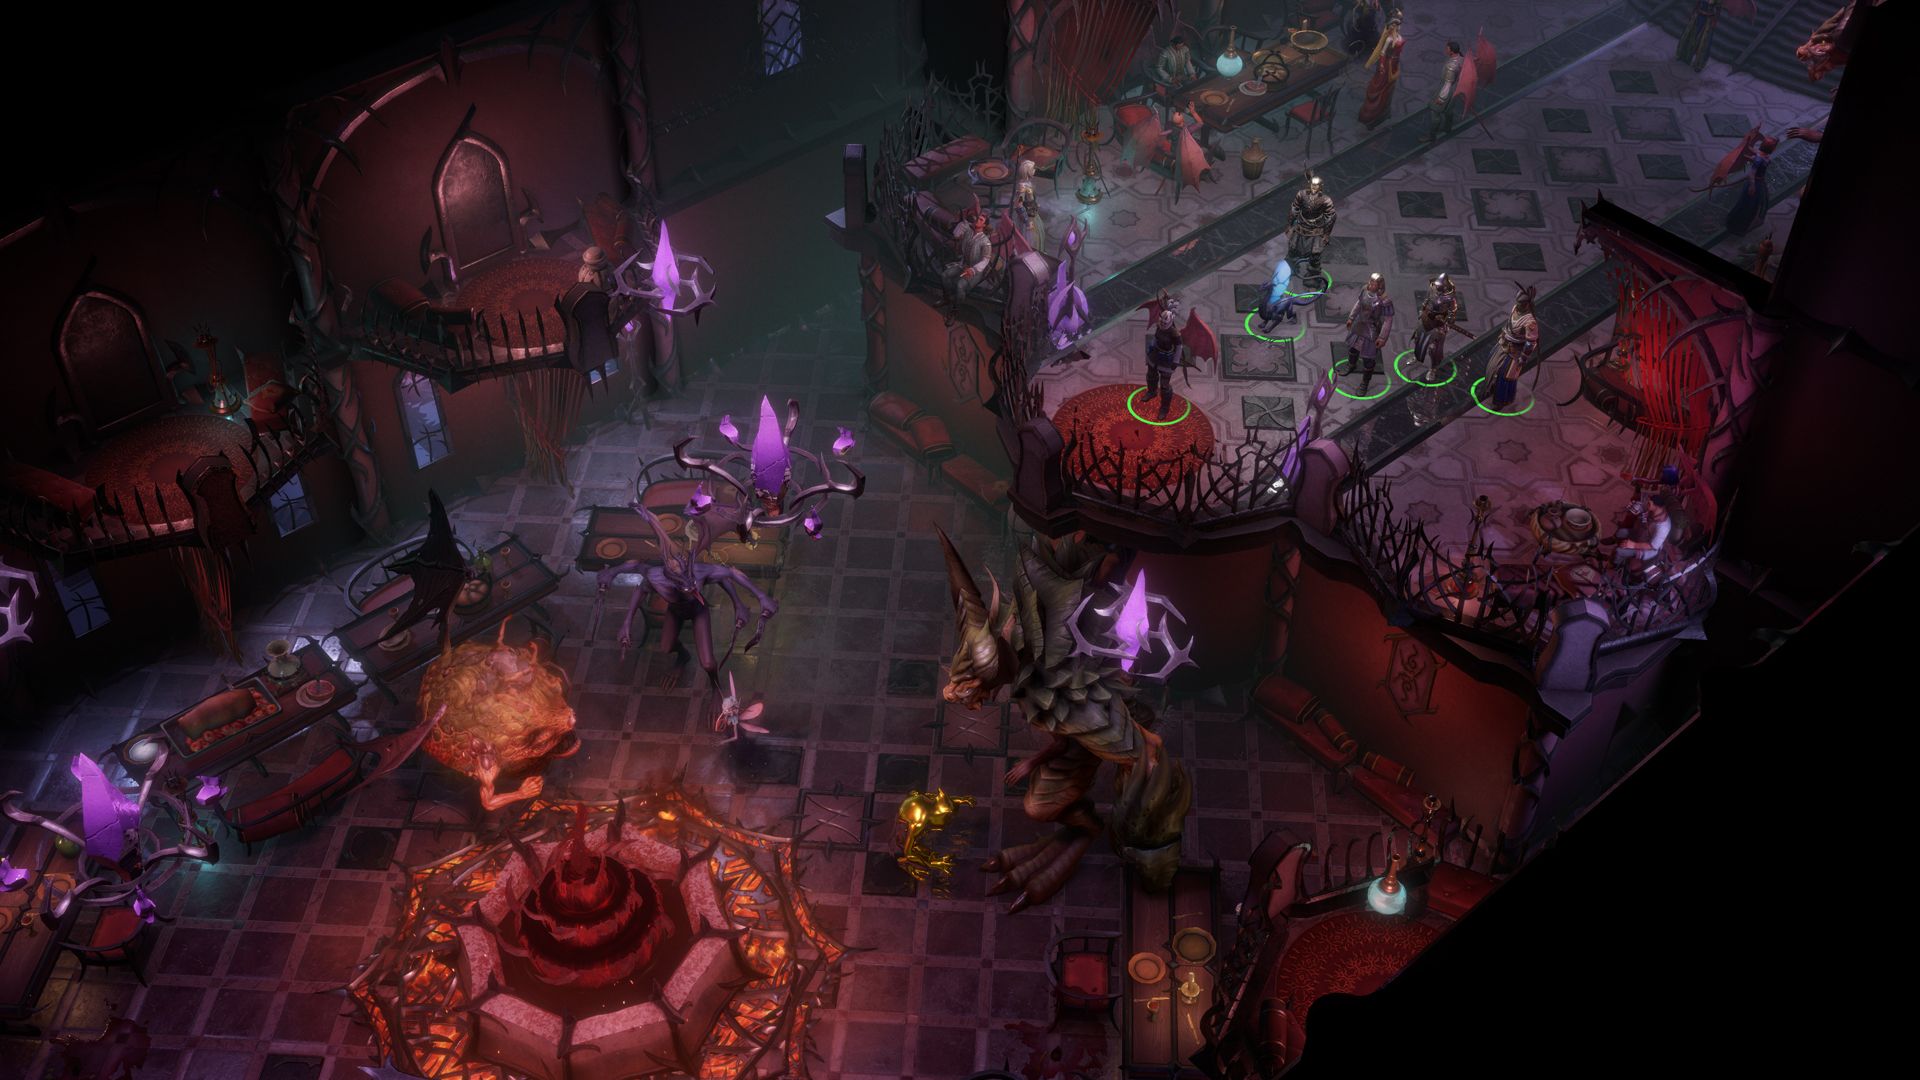 Pathfinder: Wrath of the Righteous Launches This September on PC